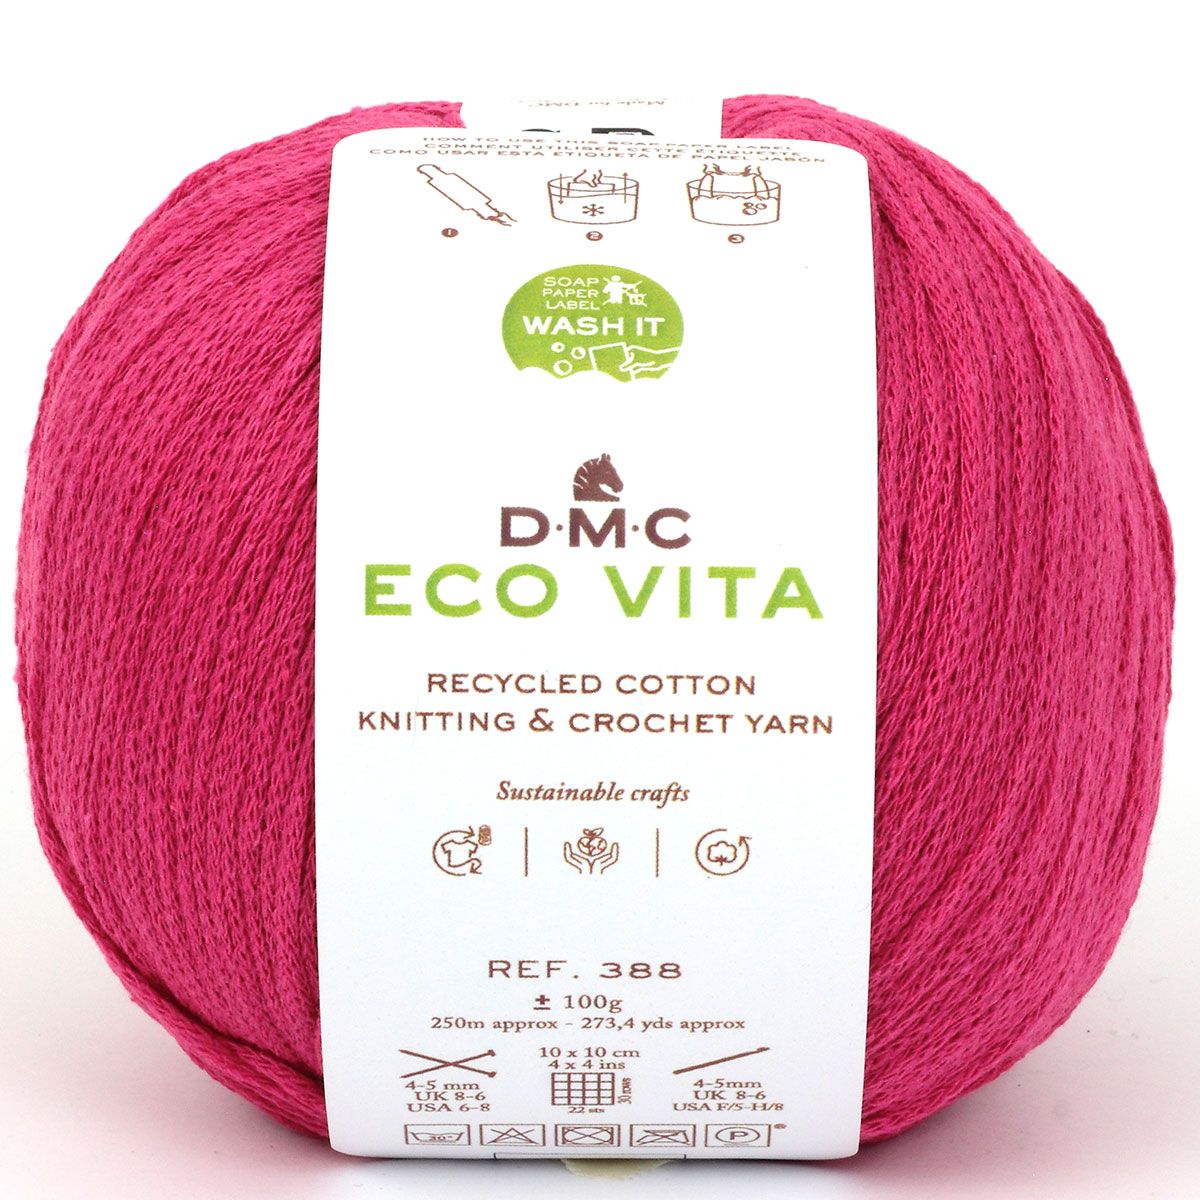 DMC Eco Vita Recycled Cotton Yarn. Wide Variety of Colors Inspired by Nature